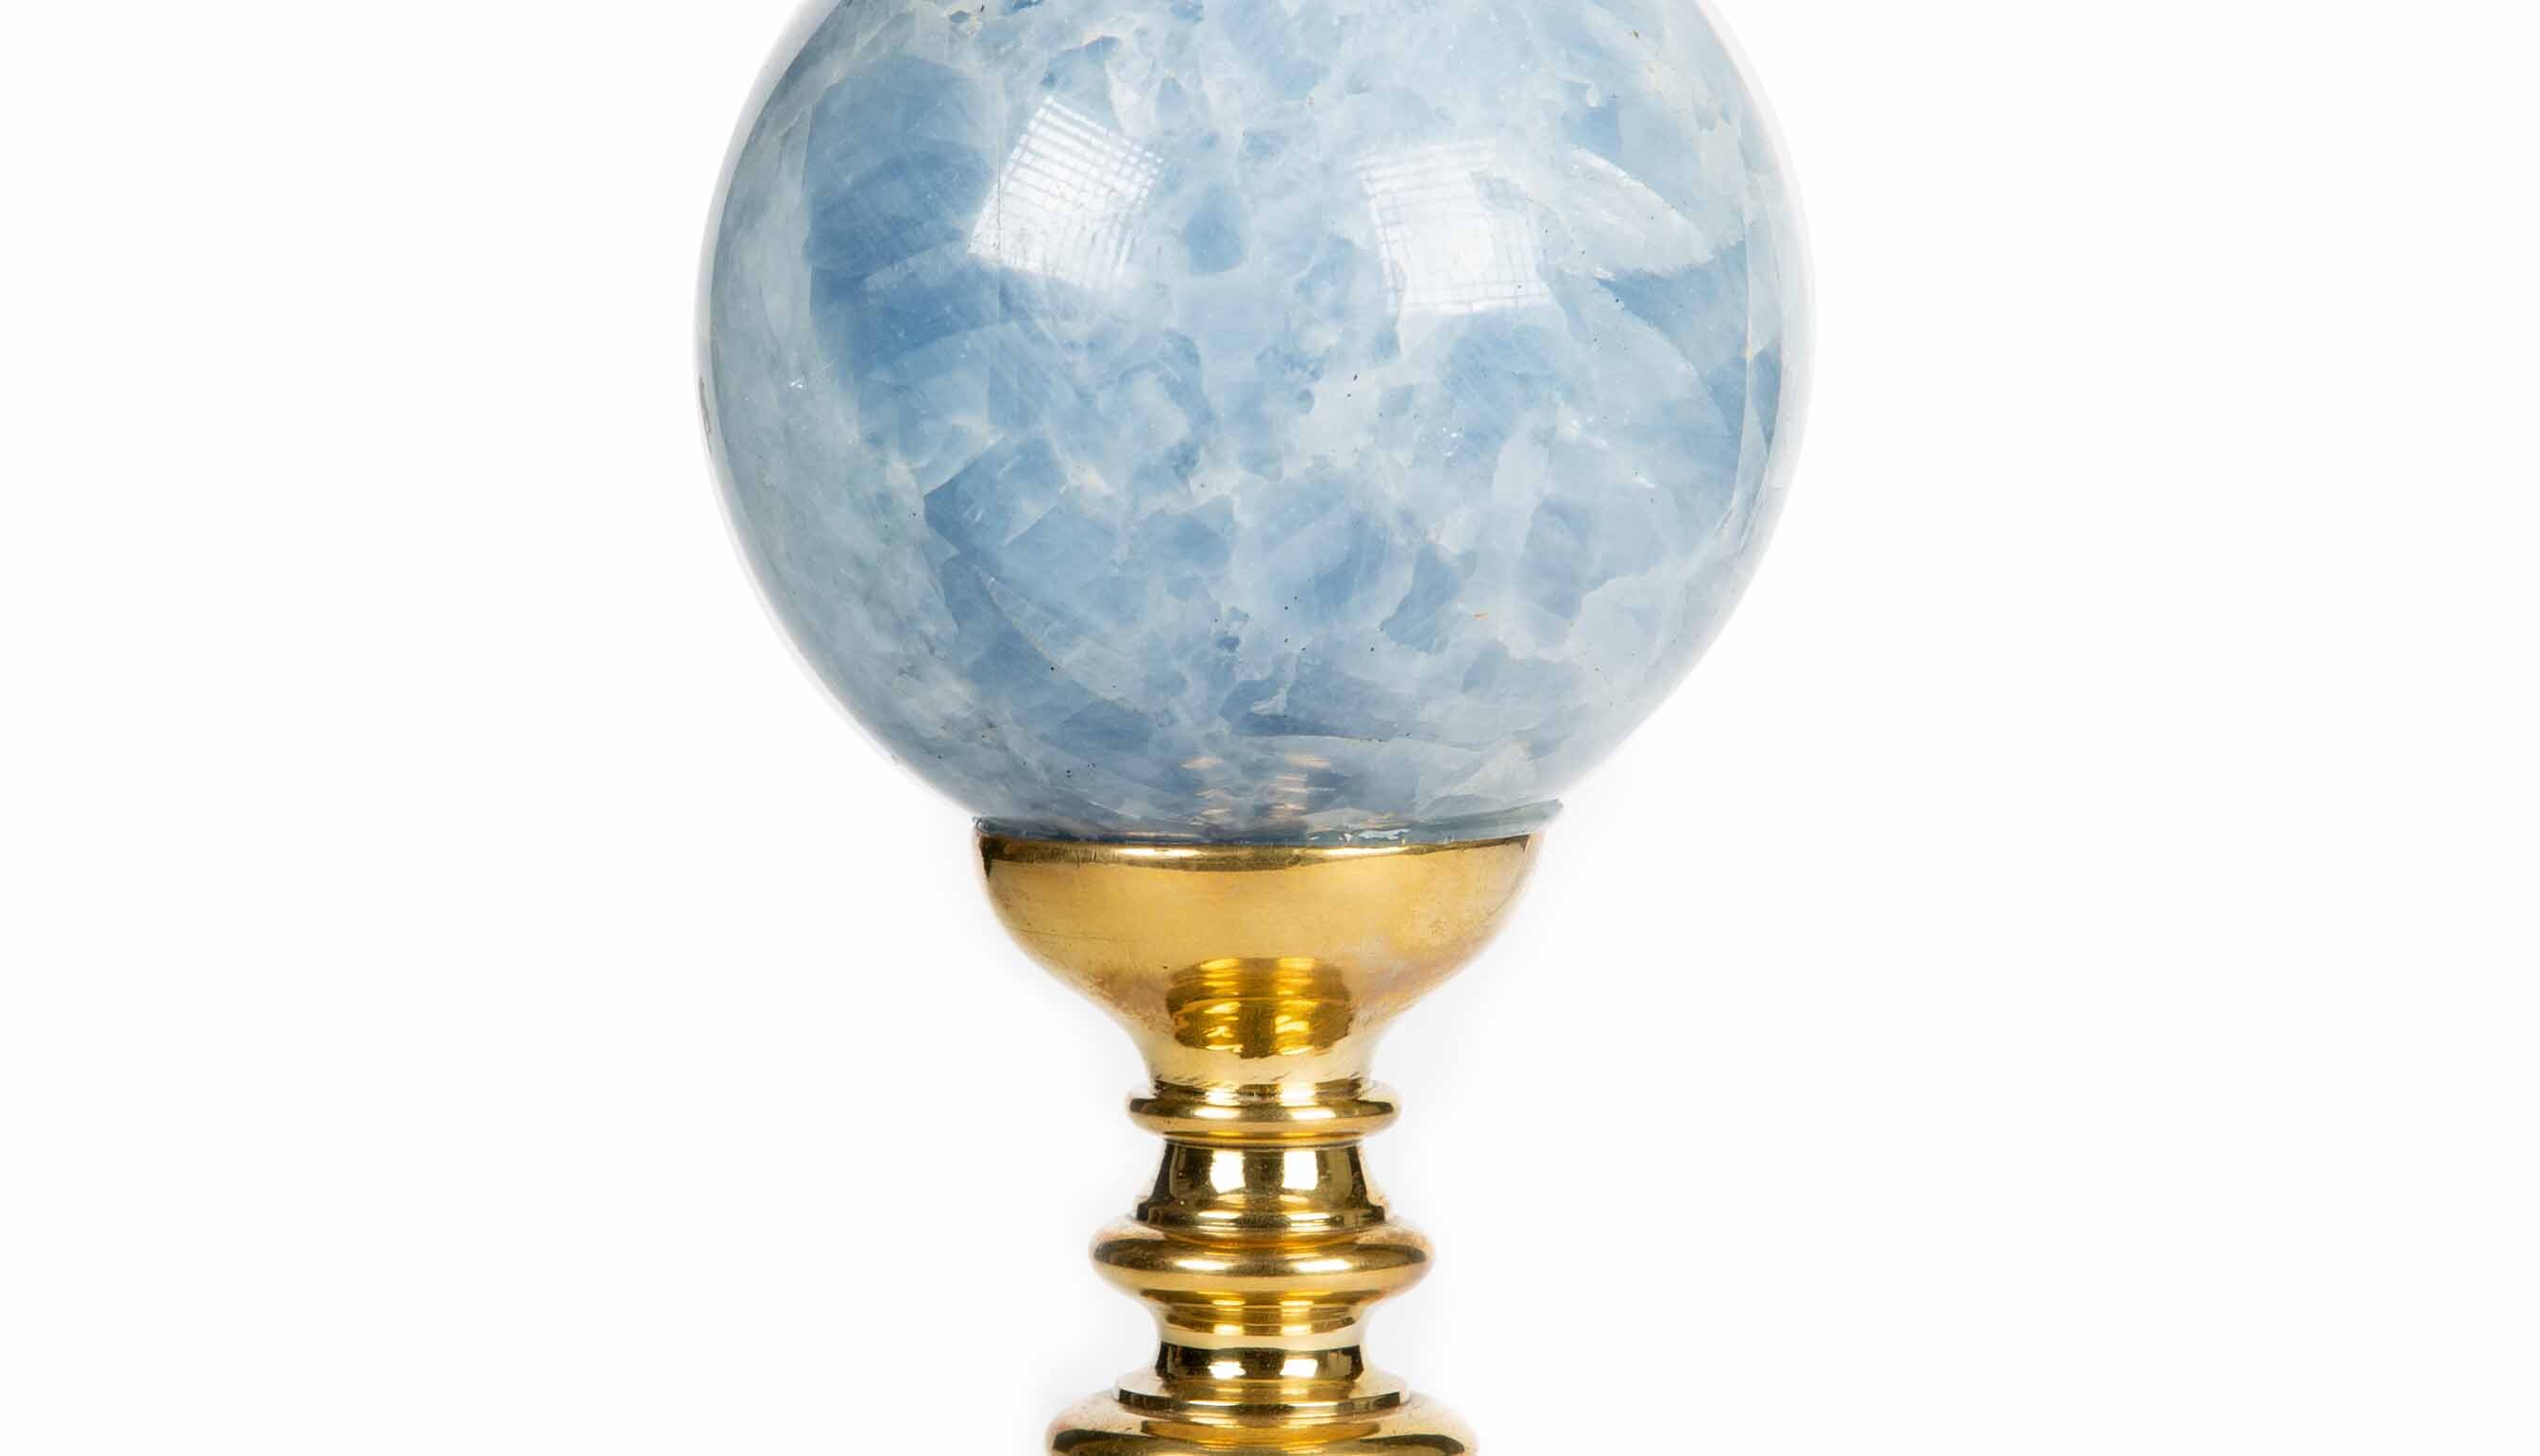 Blue Apatite Sphere Mounted on Brass Base